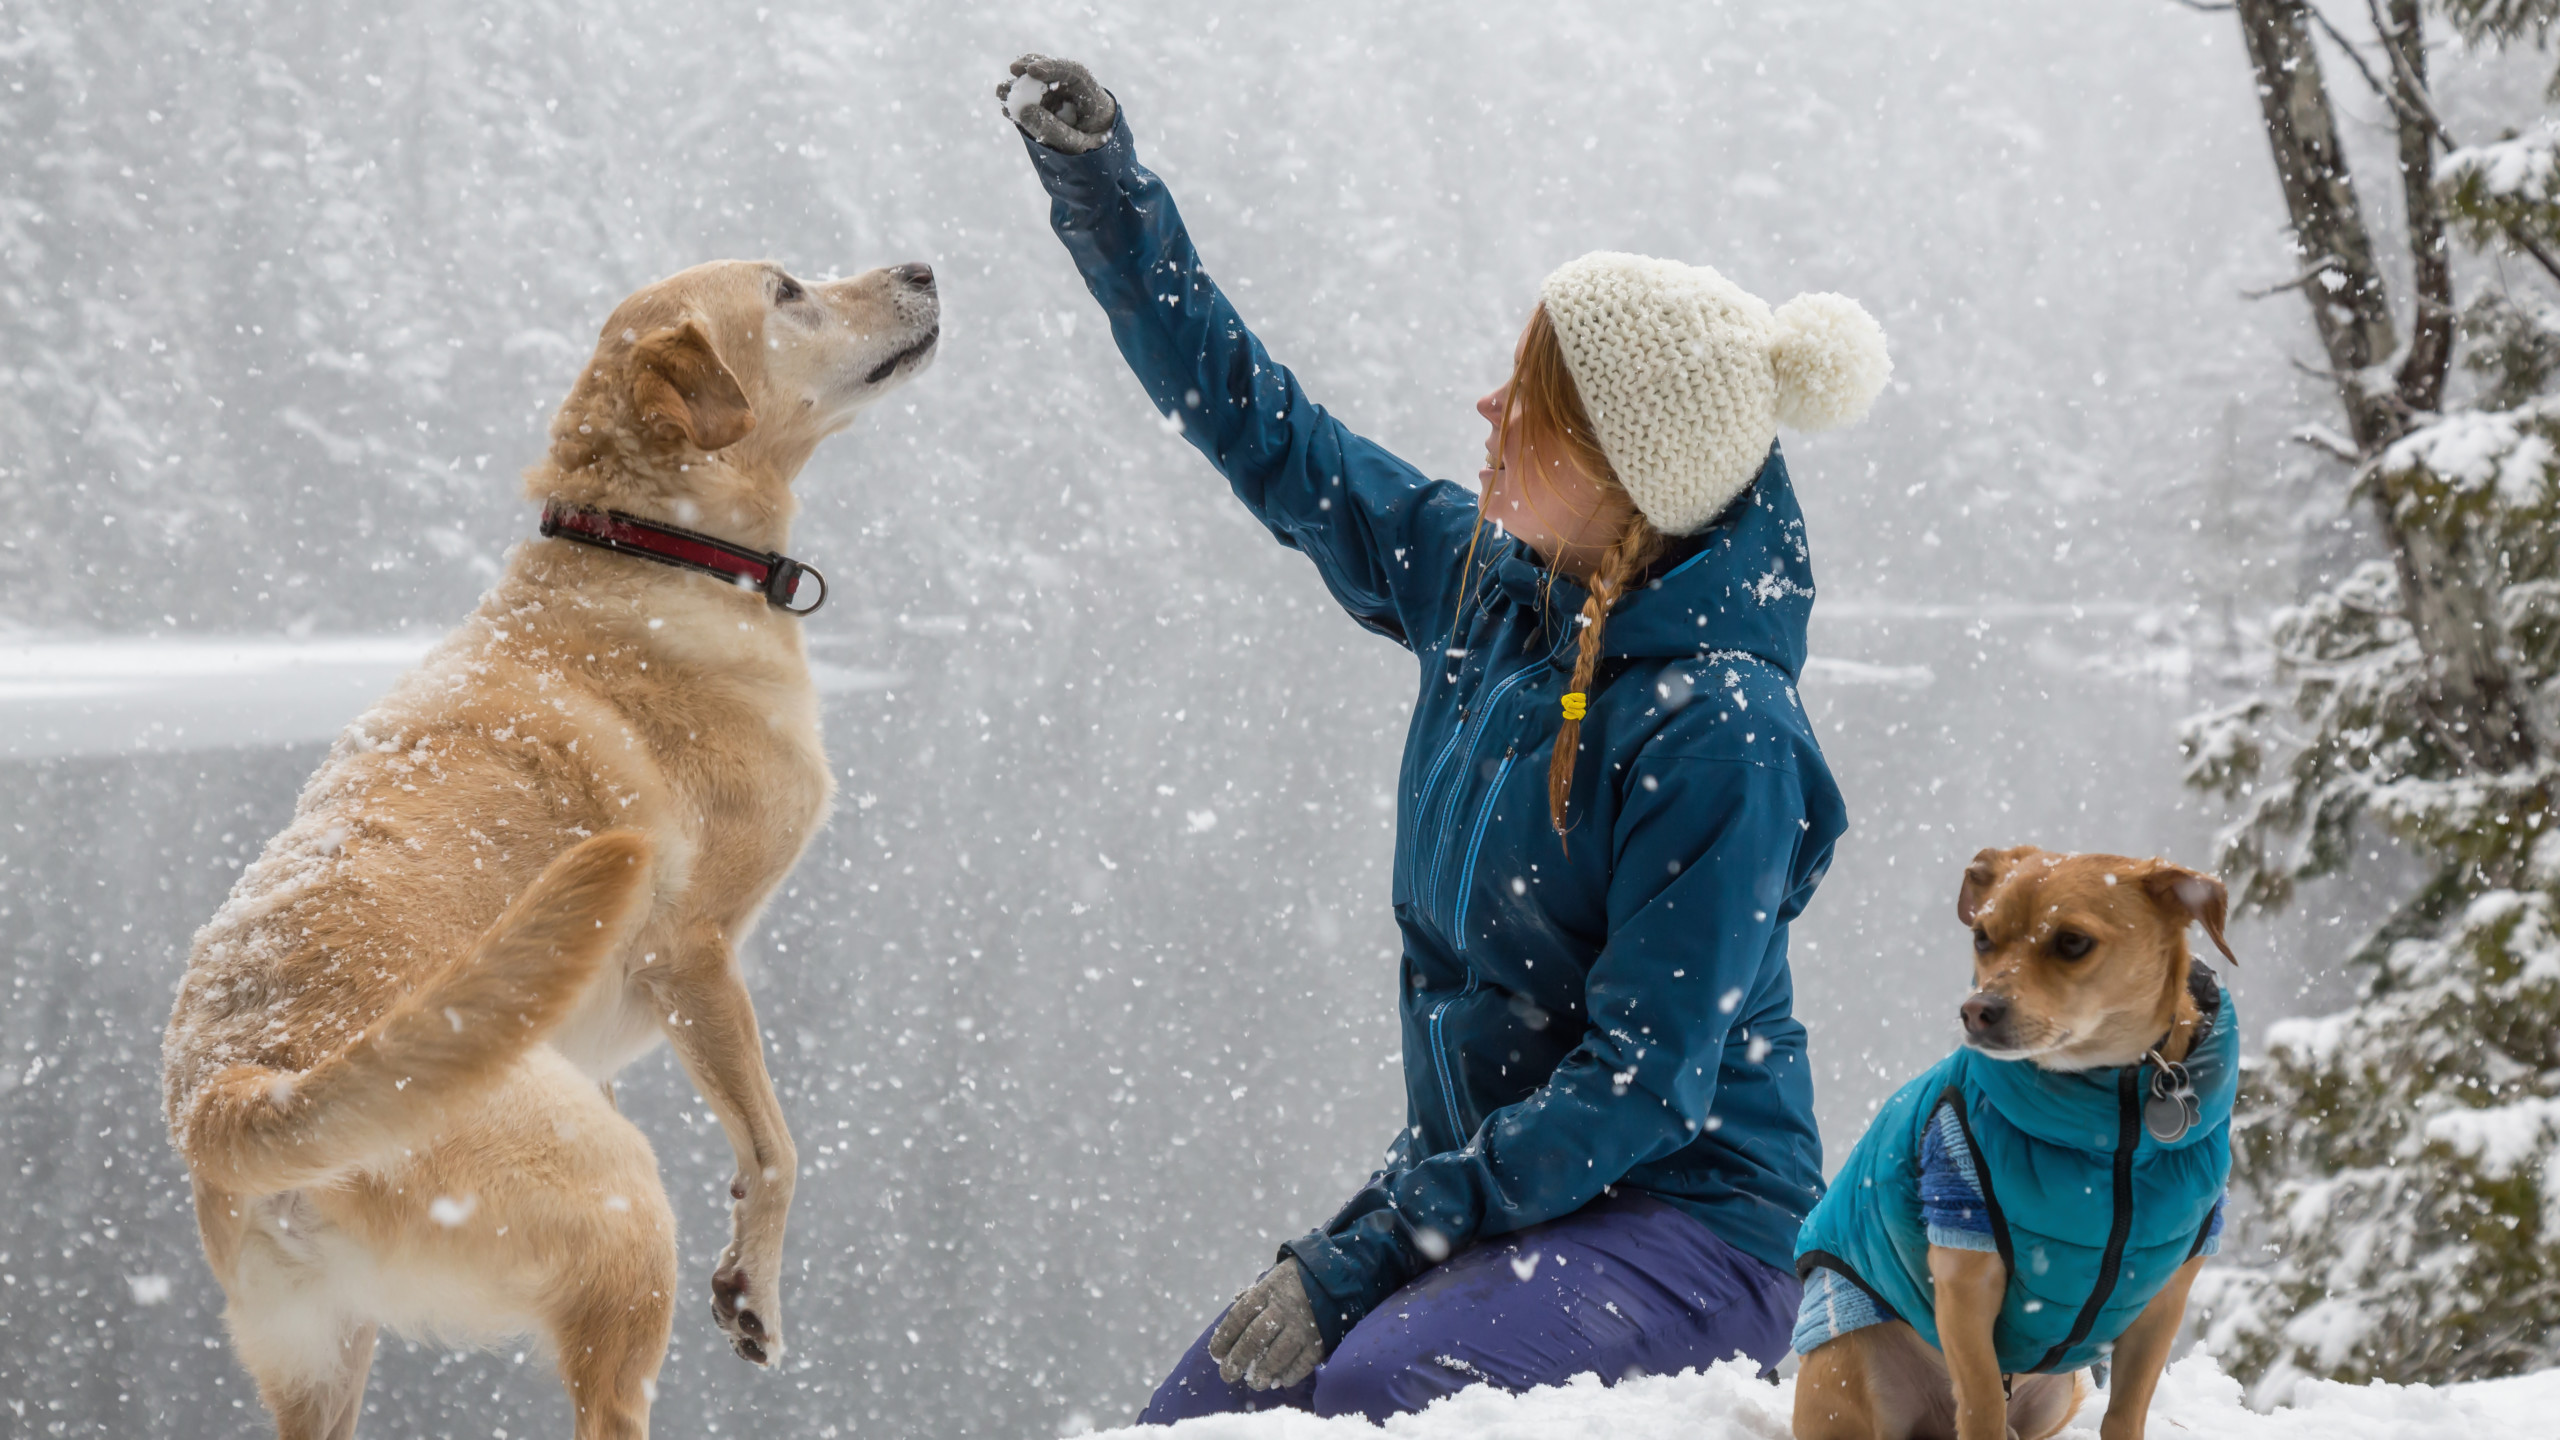 Girl playing with her dog in the snow.